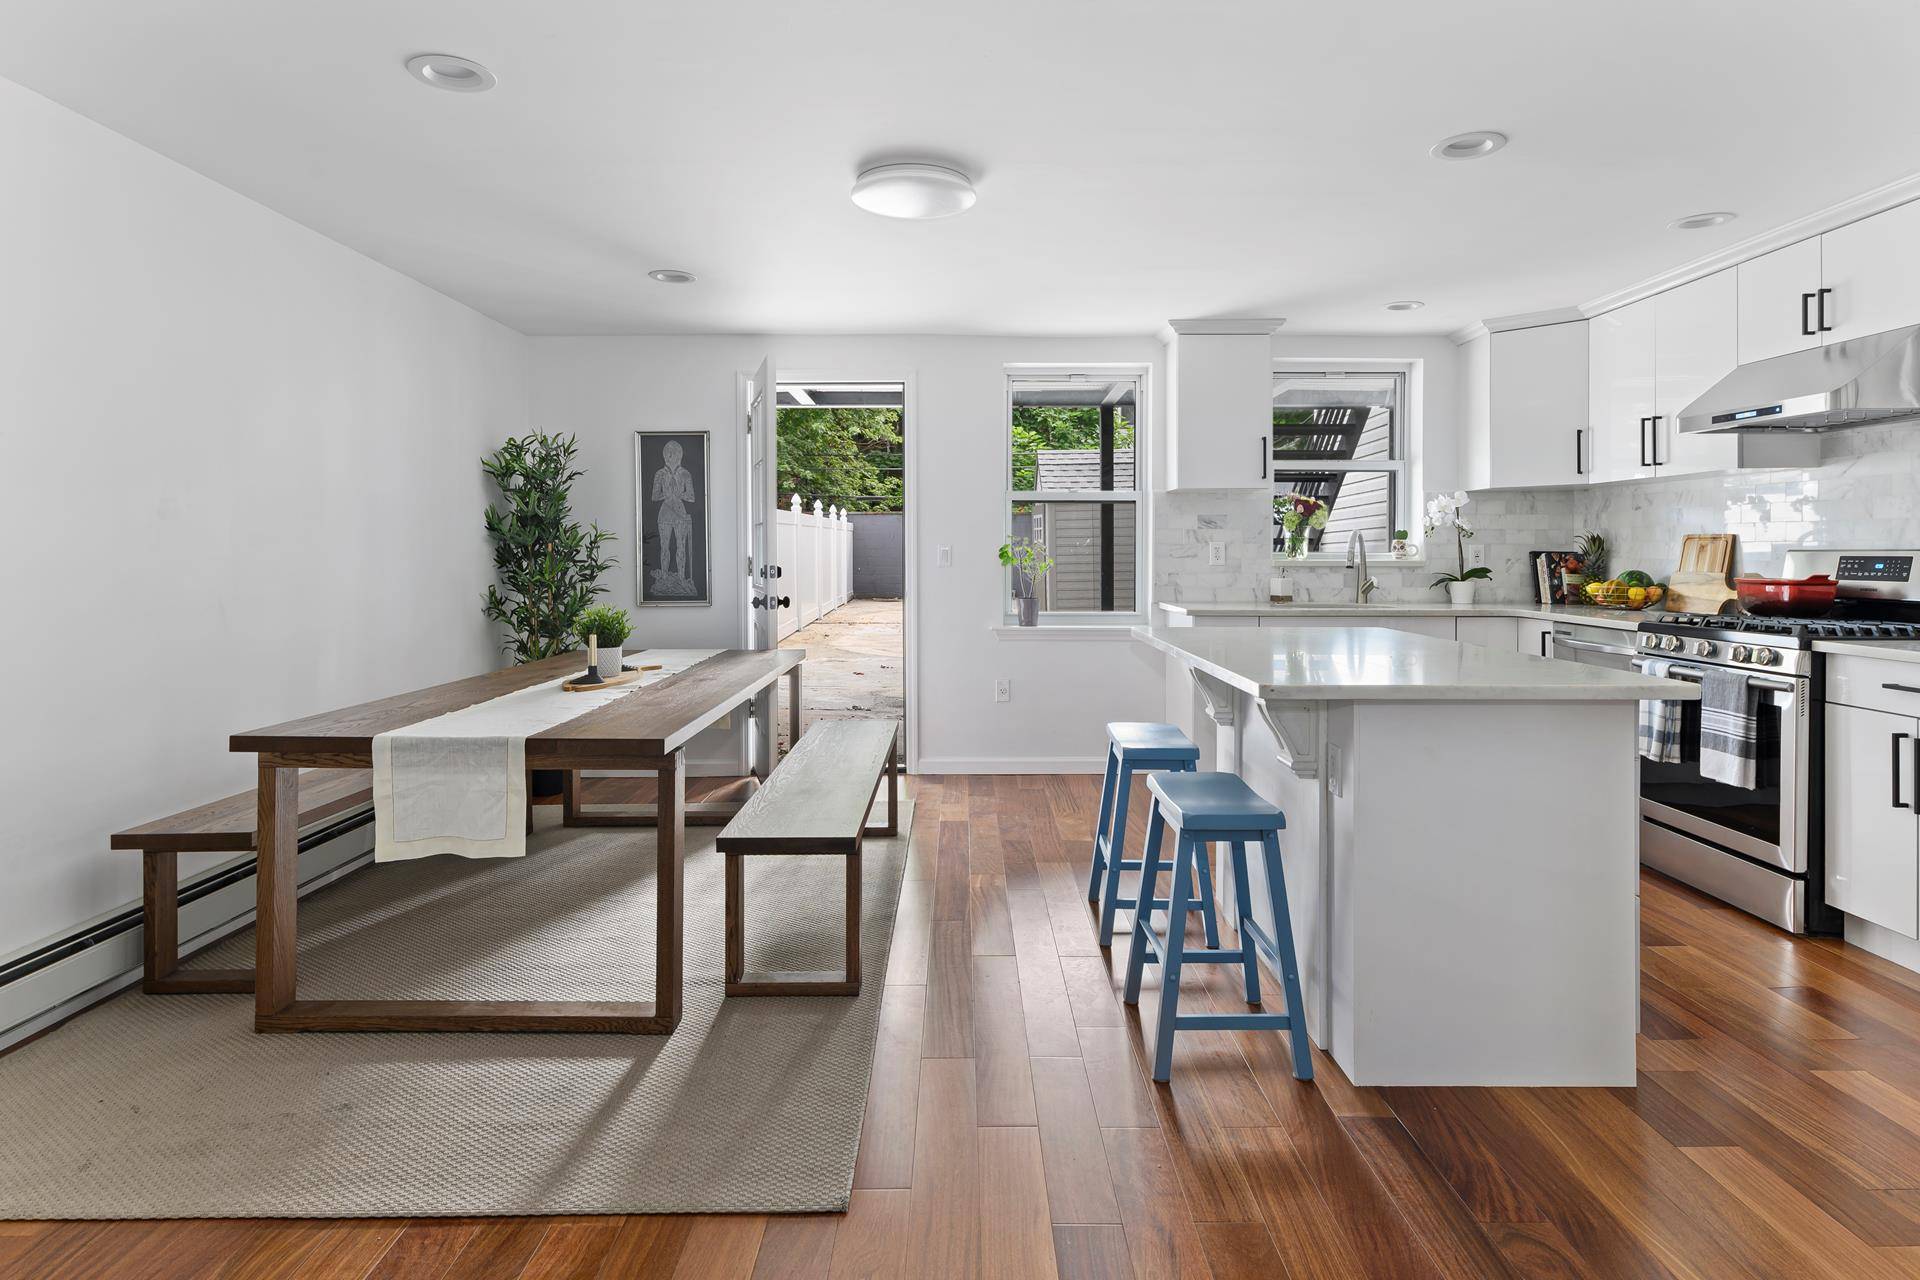 This beautifully gut renovated two family home features premium finishes and two outdoor spaces on a charming Brooklyn block.